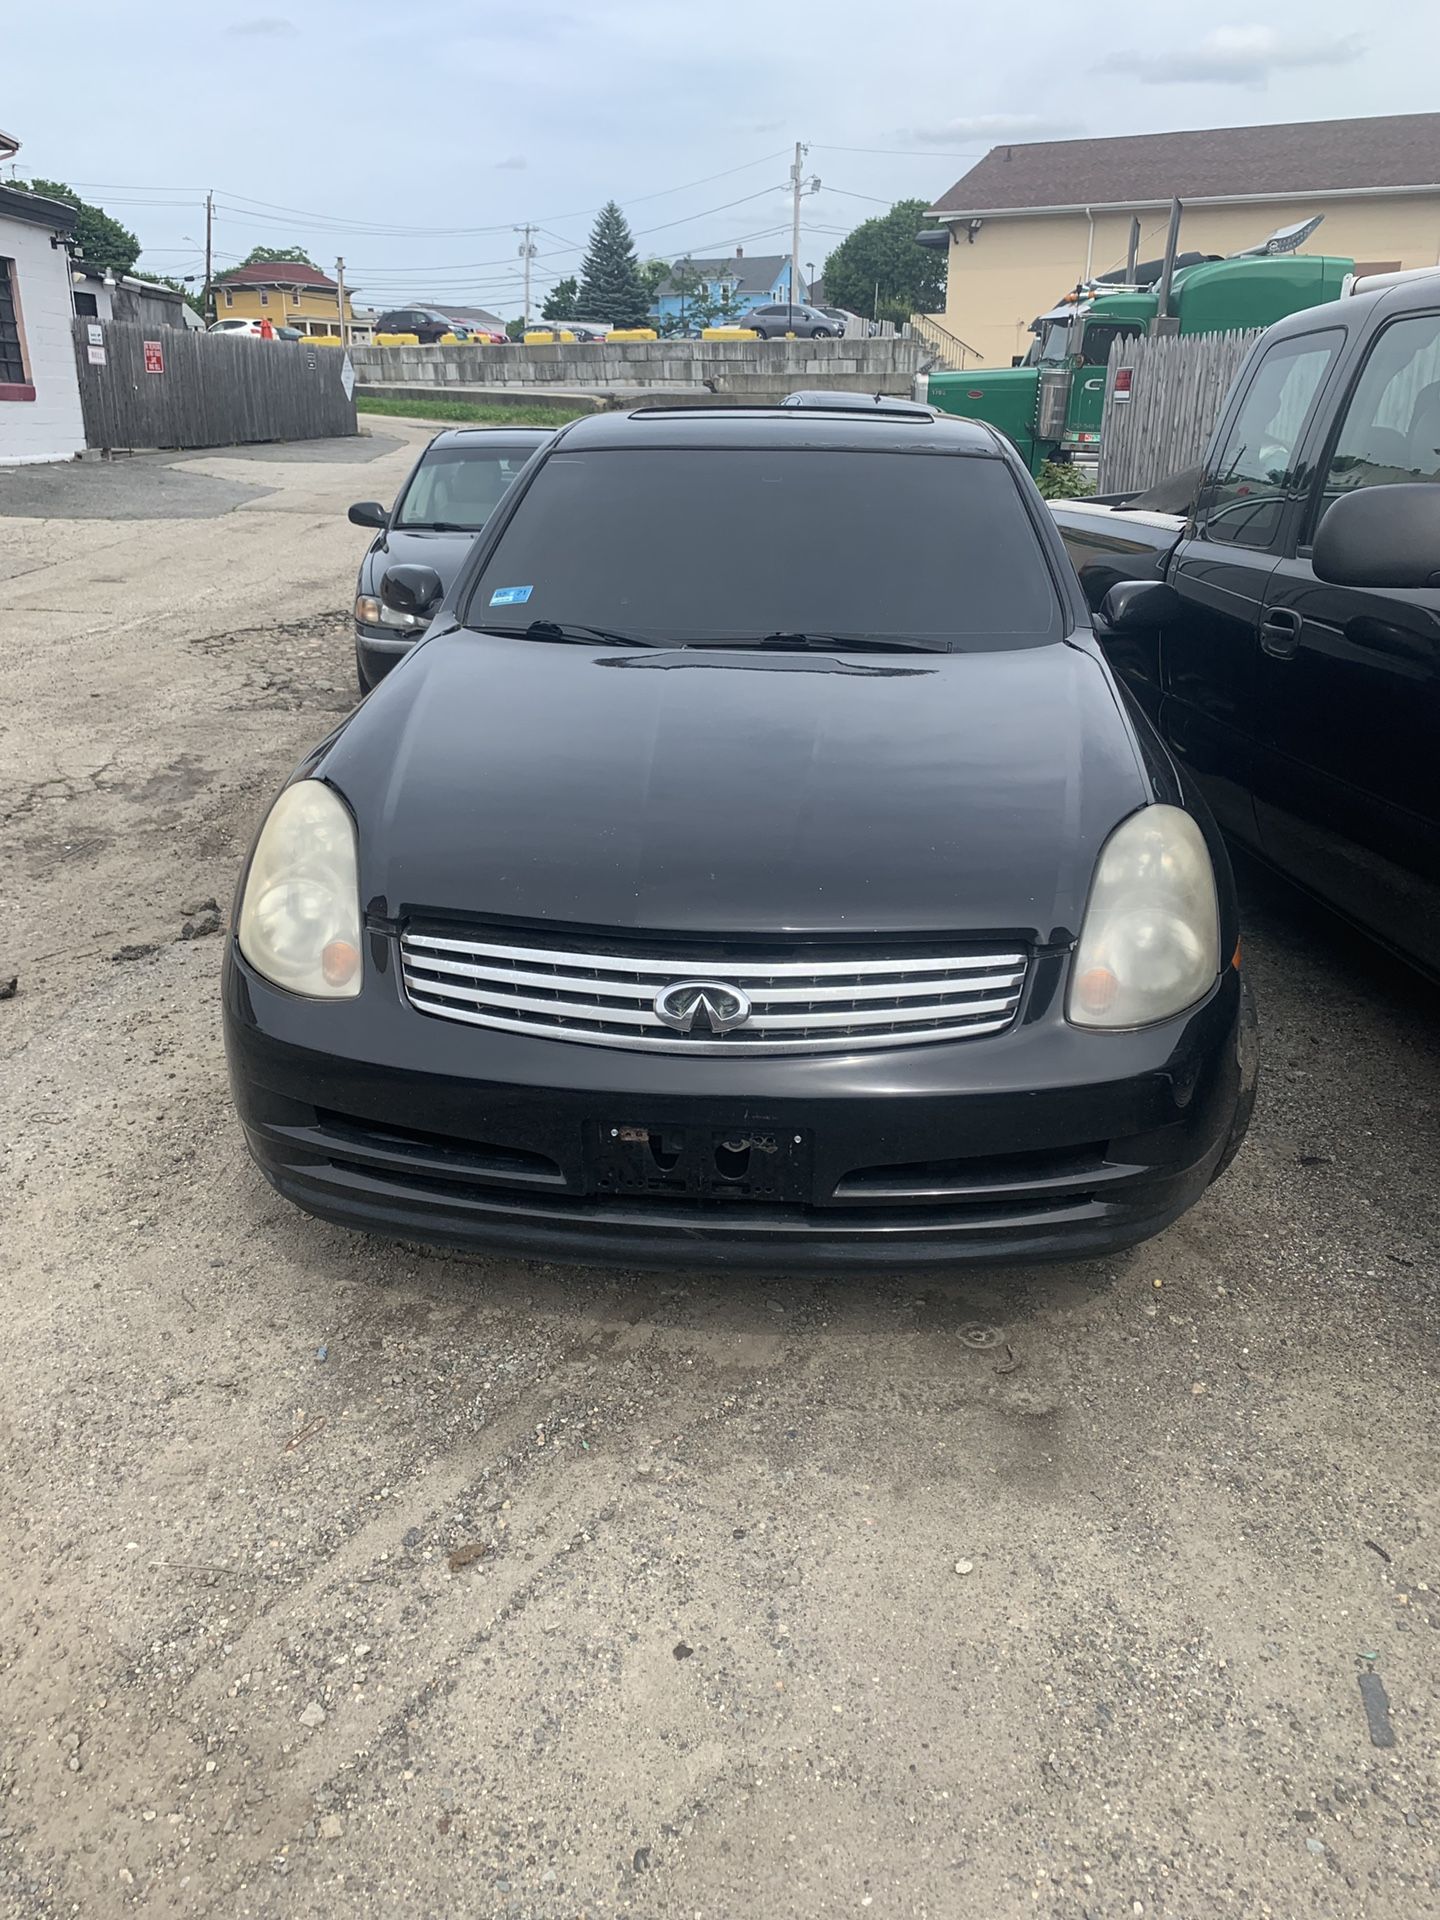 2004 infiniti g35x for parts only